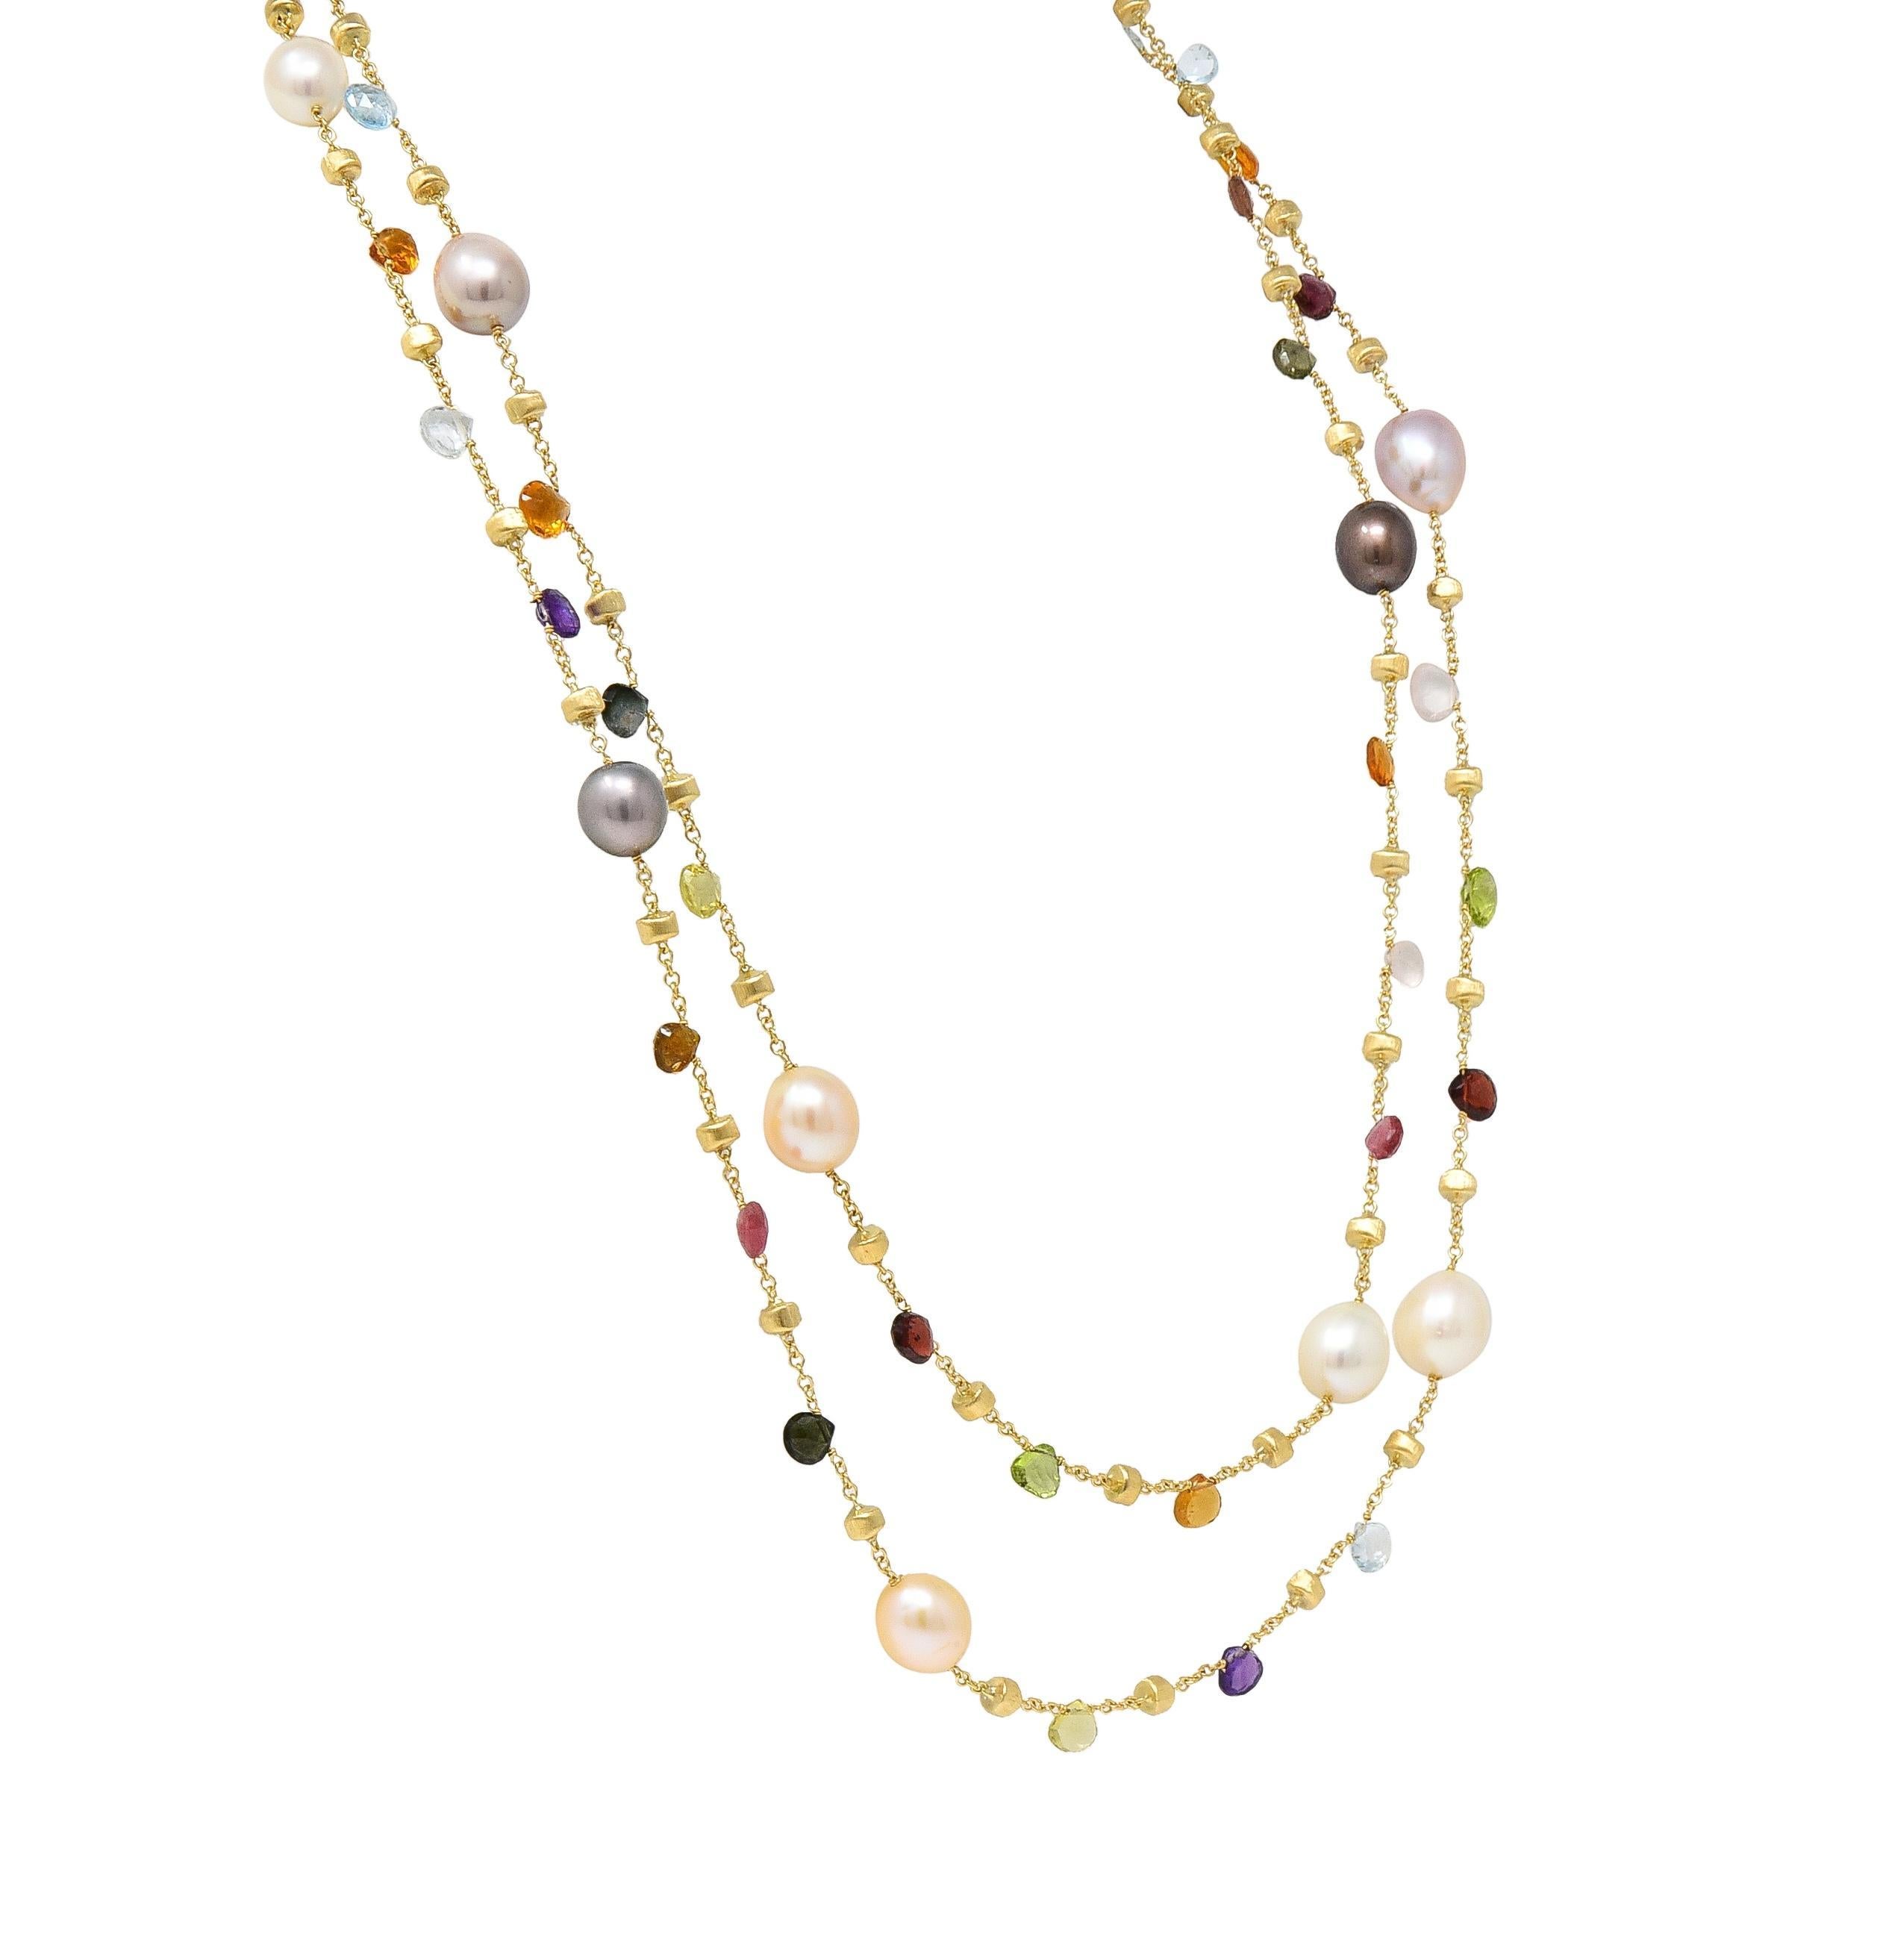 Women's or Men's Marco Bicego Cultured Pearl Multi-Gem 18 Karat Yellow Gold Confetti Necklace For Sale